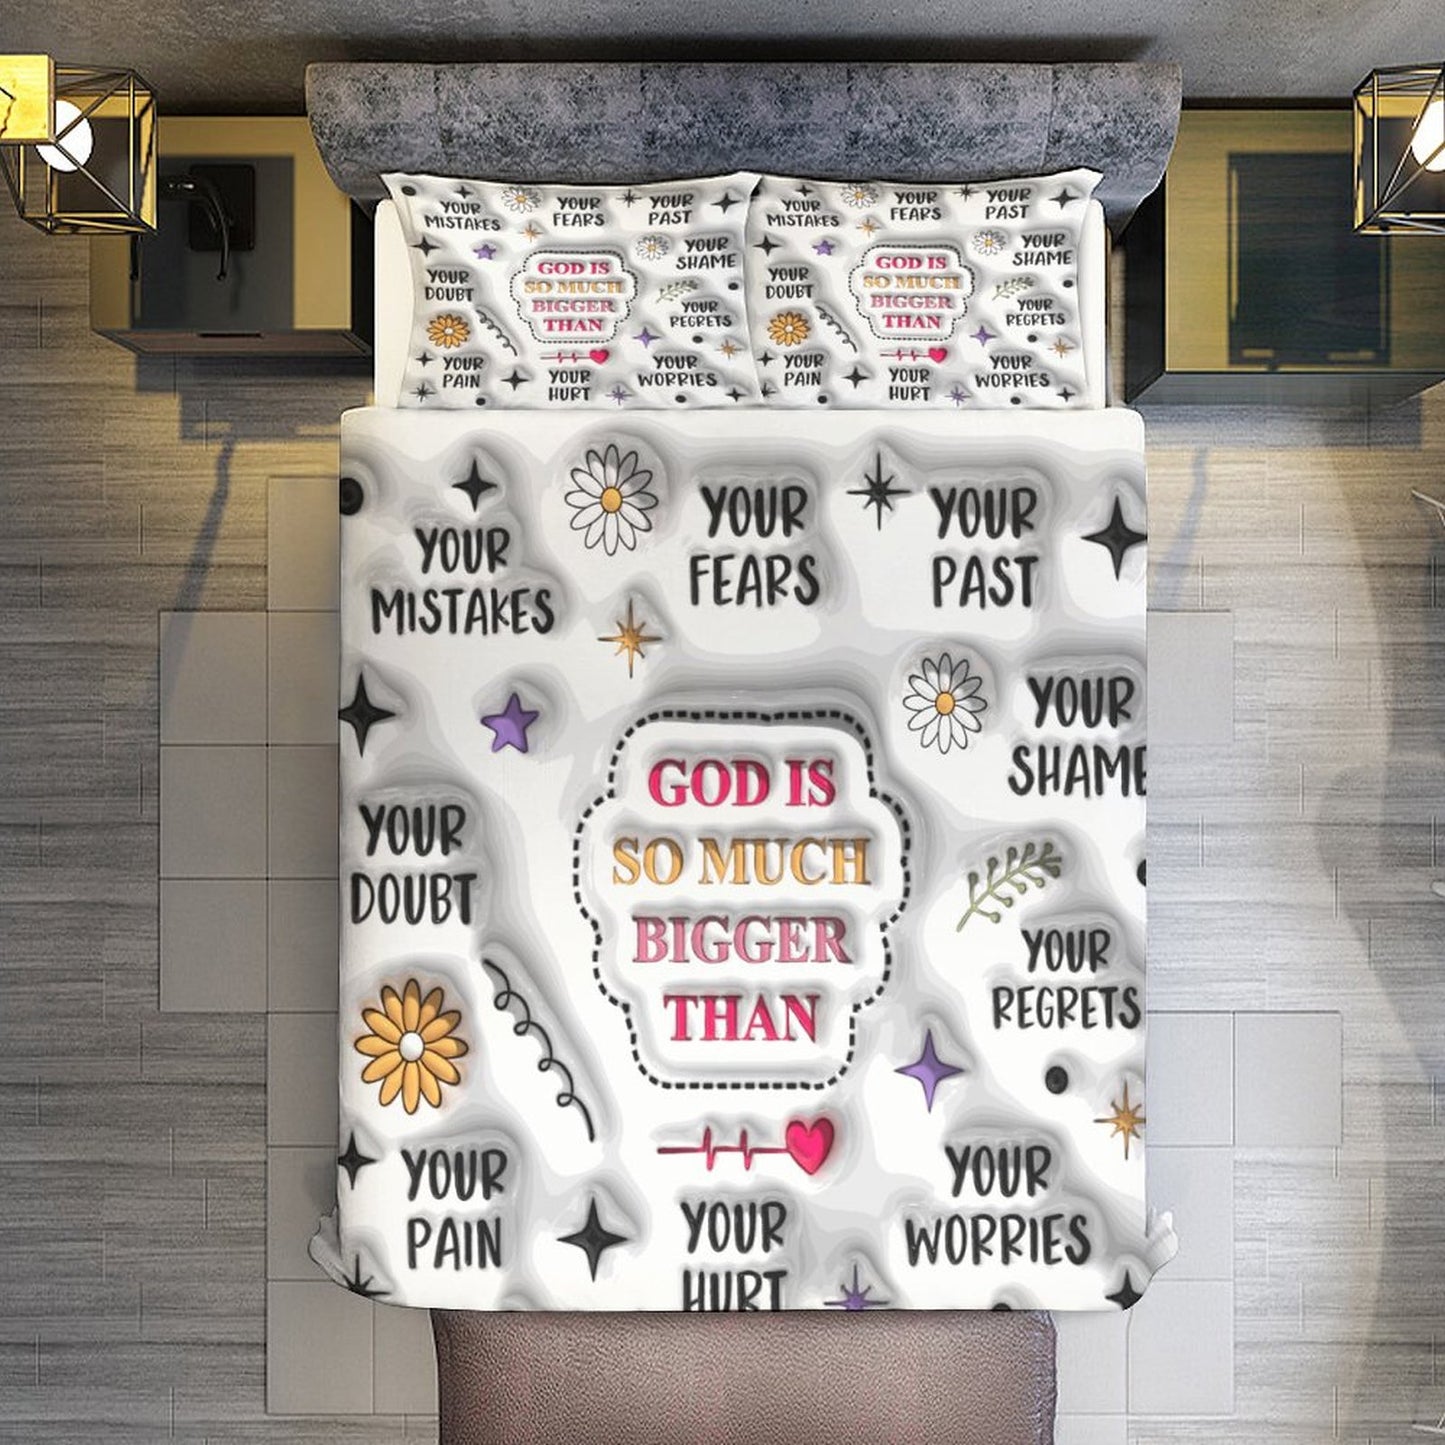 God Is So Much Bigger Than 3-Piece Christian Comforter Bedding Set-86"×70"/ 218×177cm SALE-Personal Design